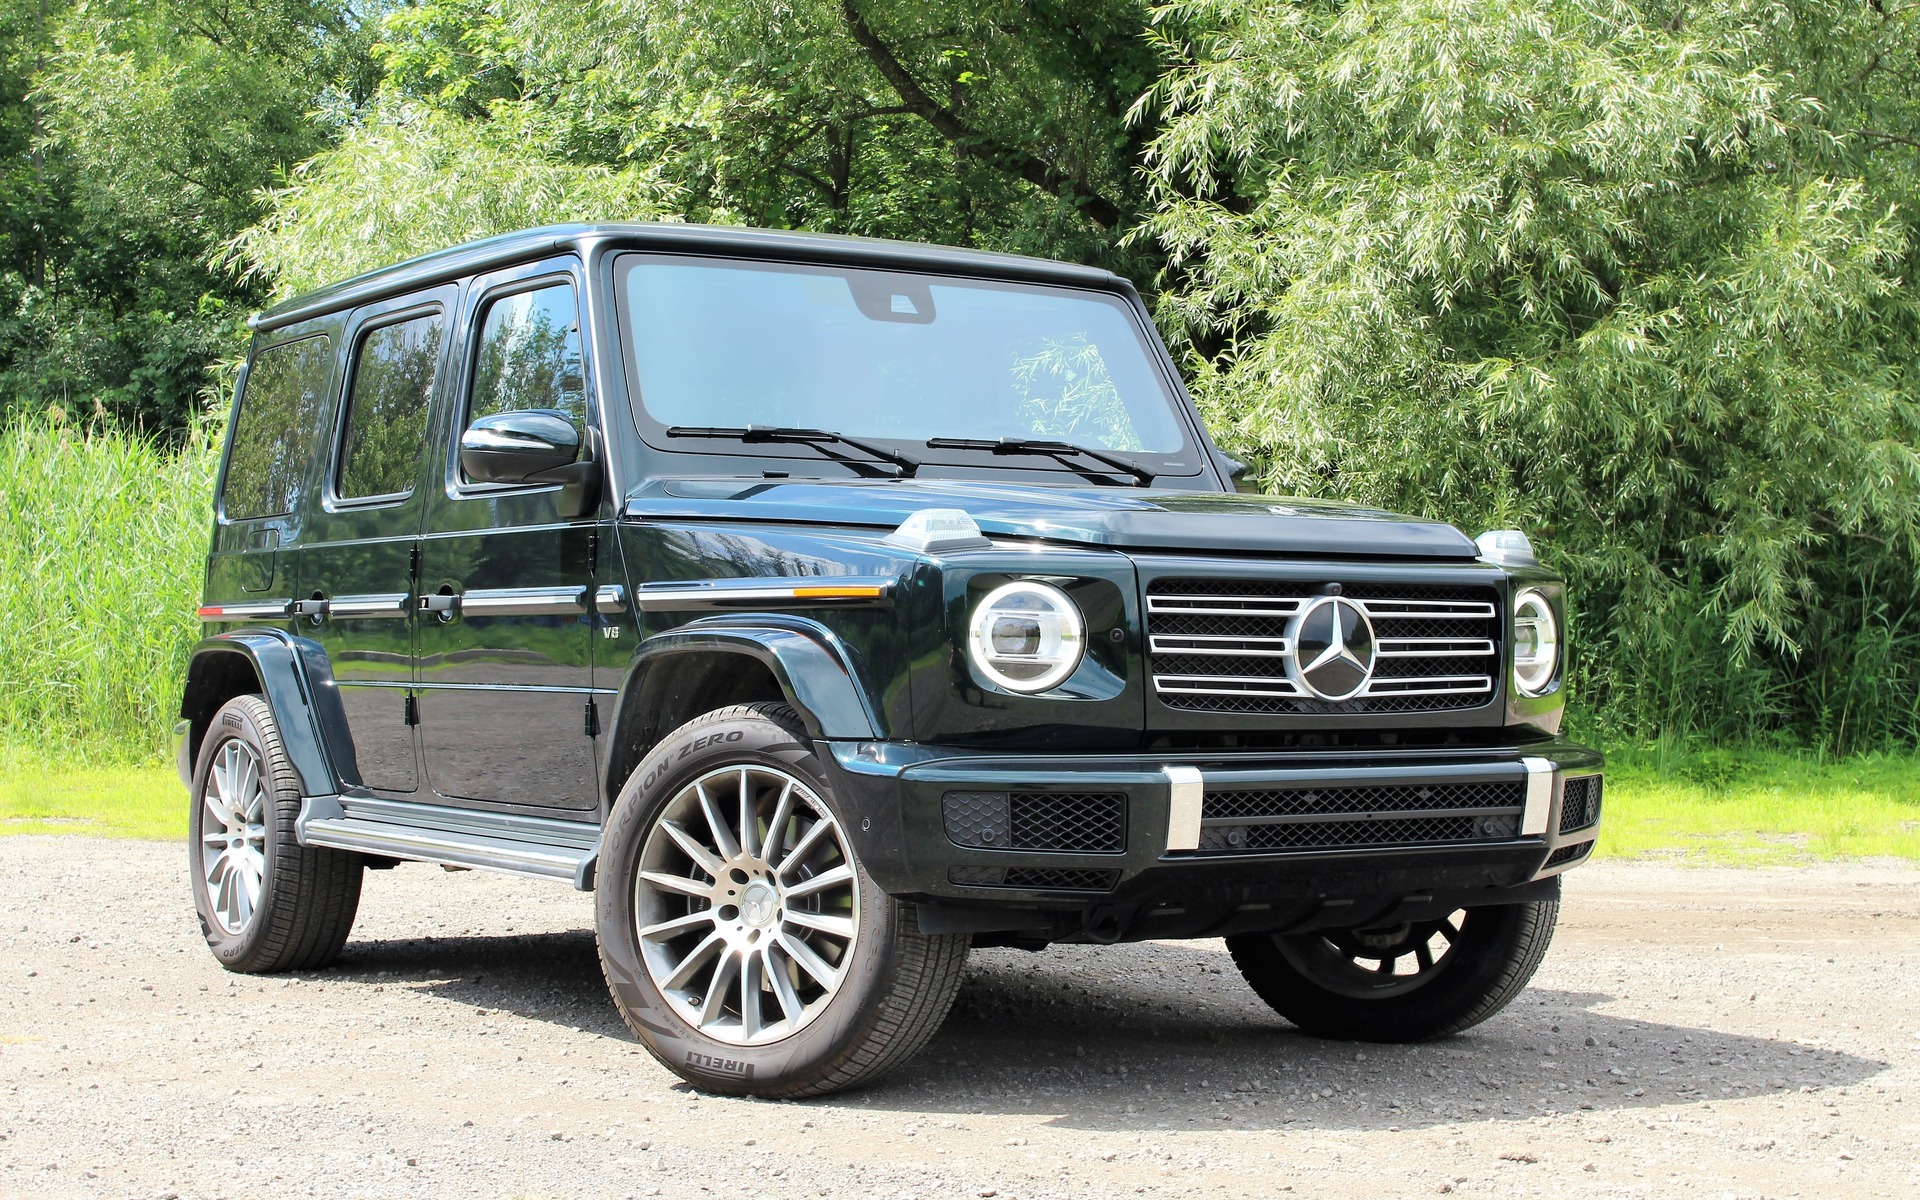 21 Mercedes Benz G Class News Reviews Picture Galleries And Videos The Car Guide